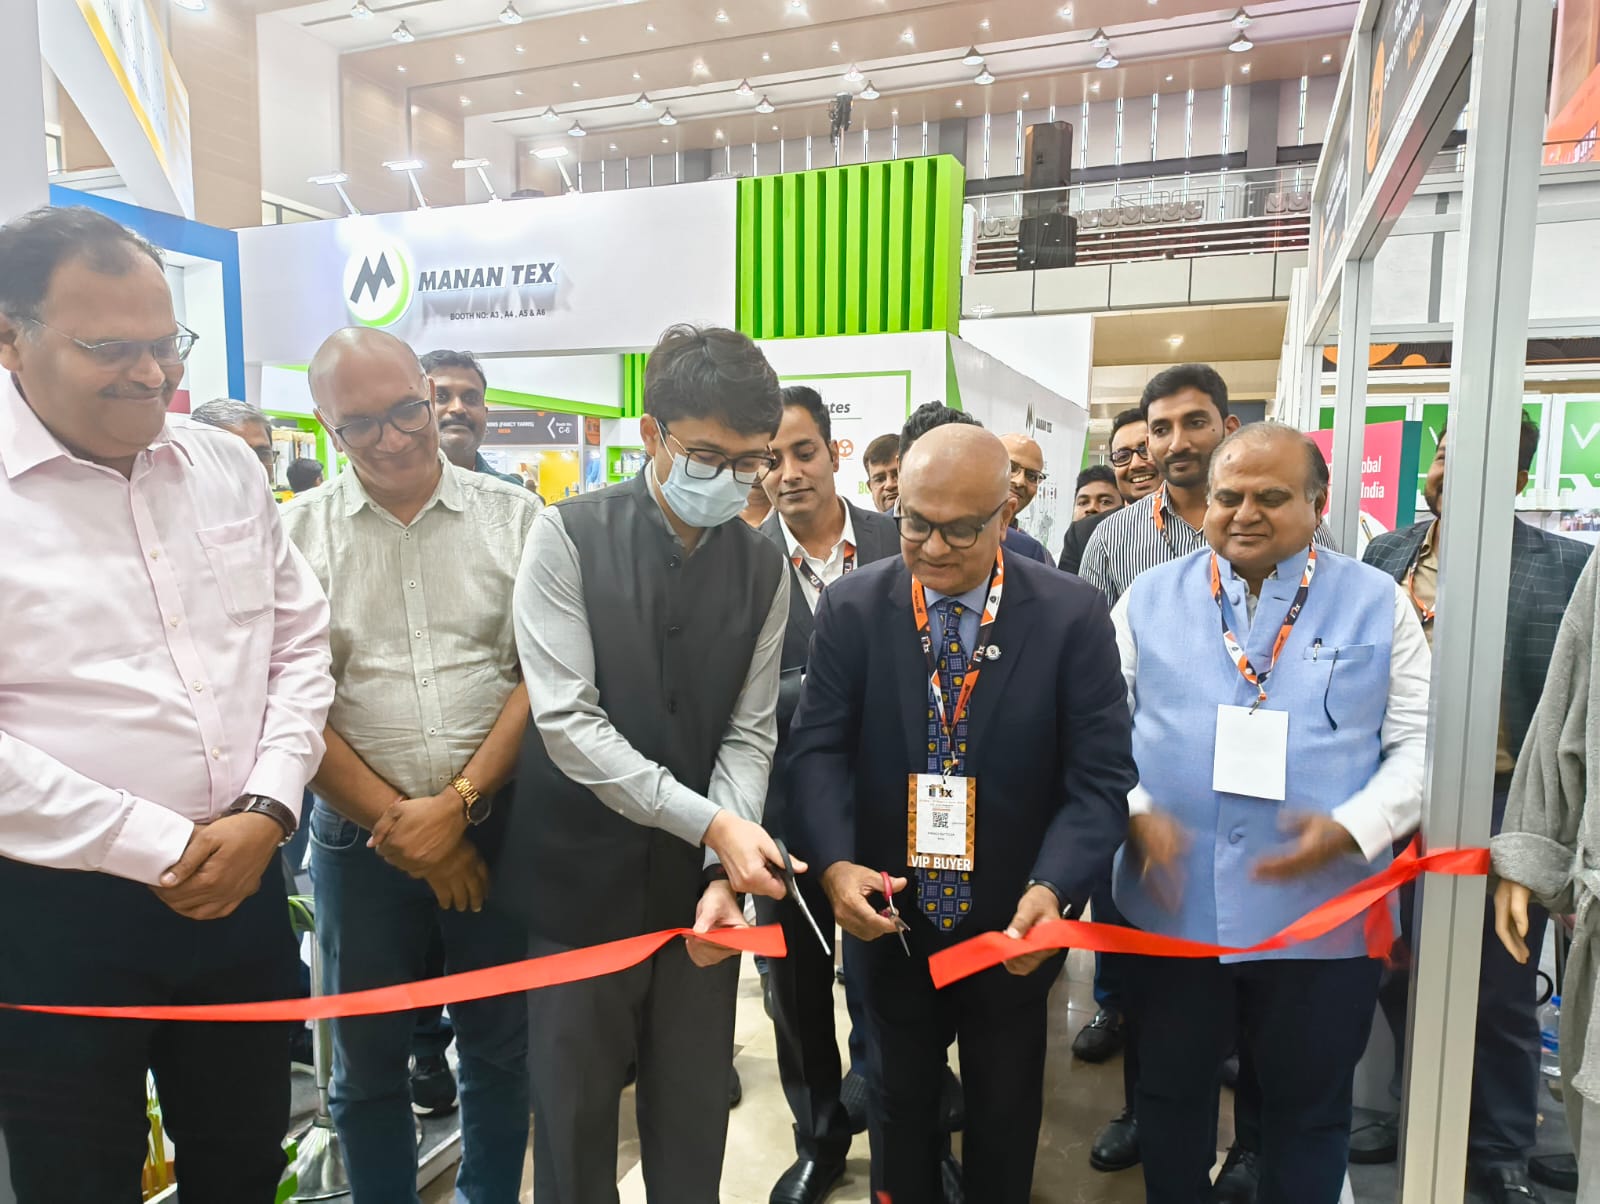 Shri Manoj Patodia, Past Chairman, Texprocil at the Inauguration of Intex South Asia Show, Bangladesh being held from 30 May to 1st June 2024